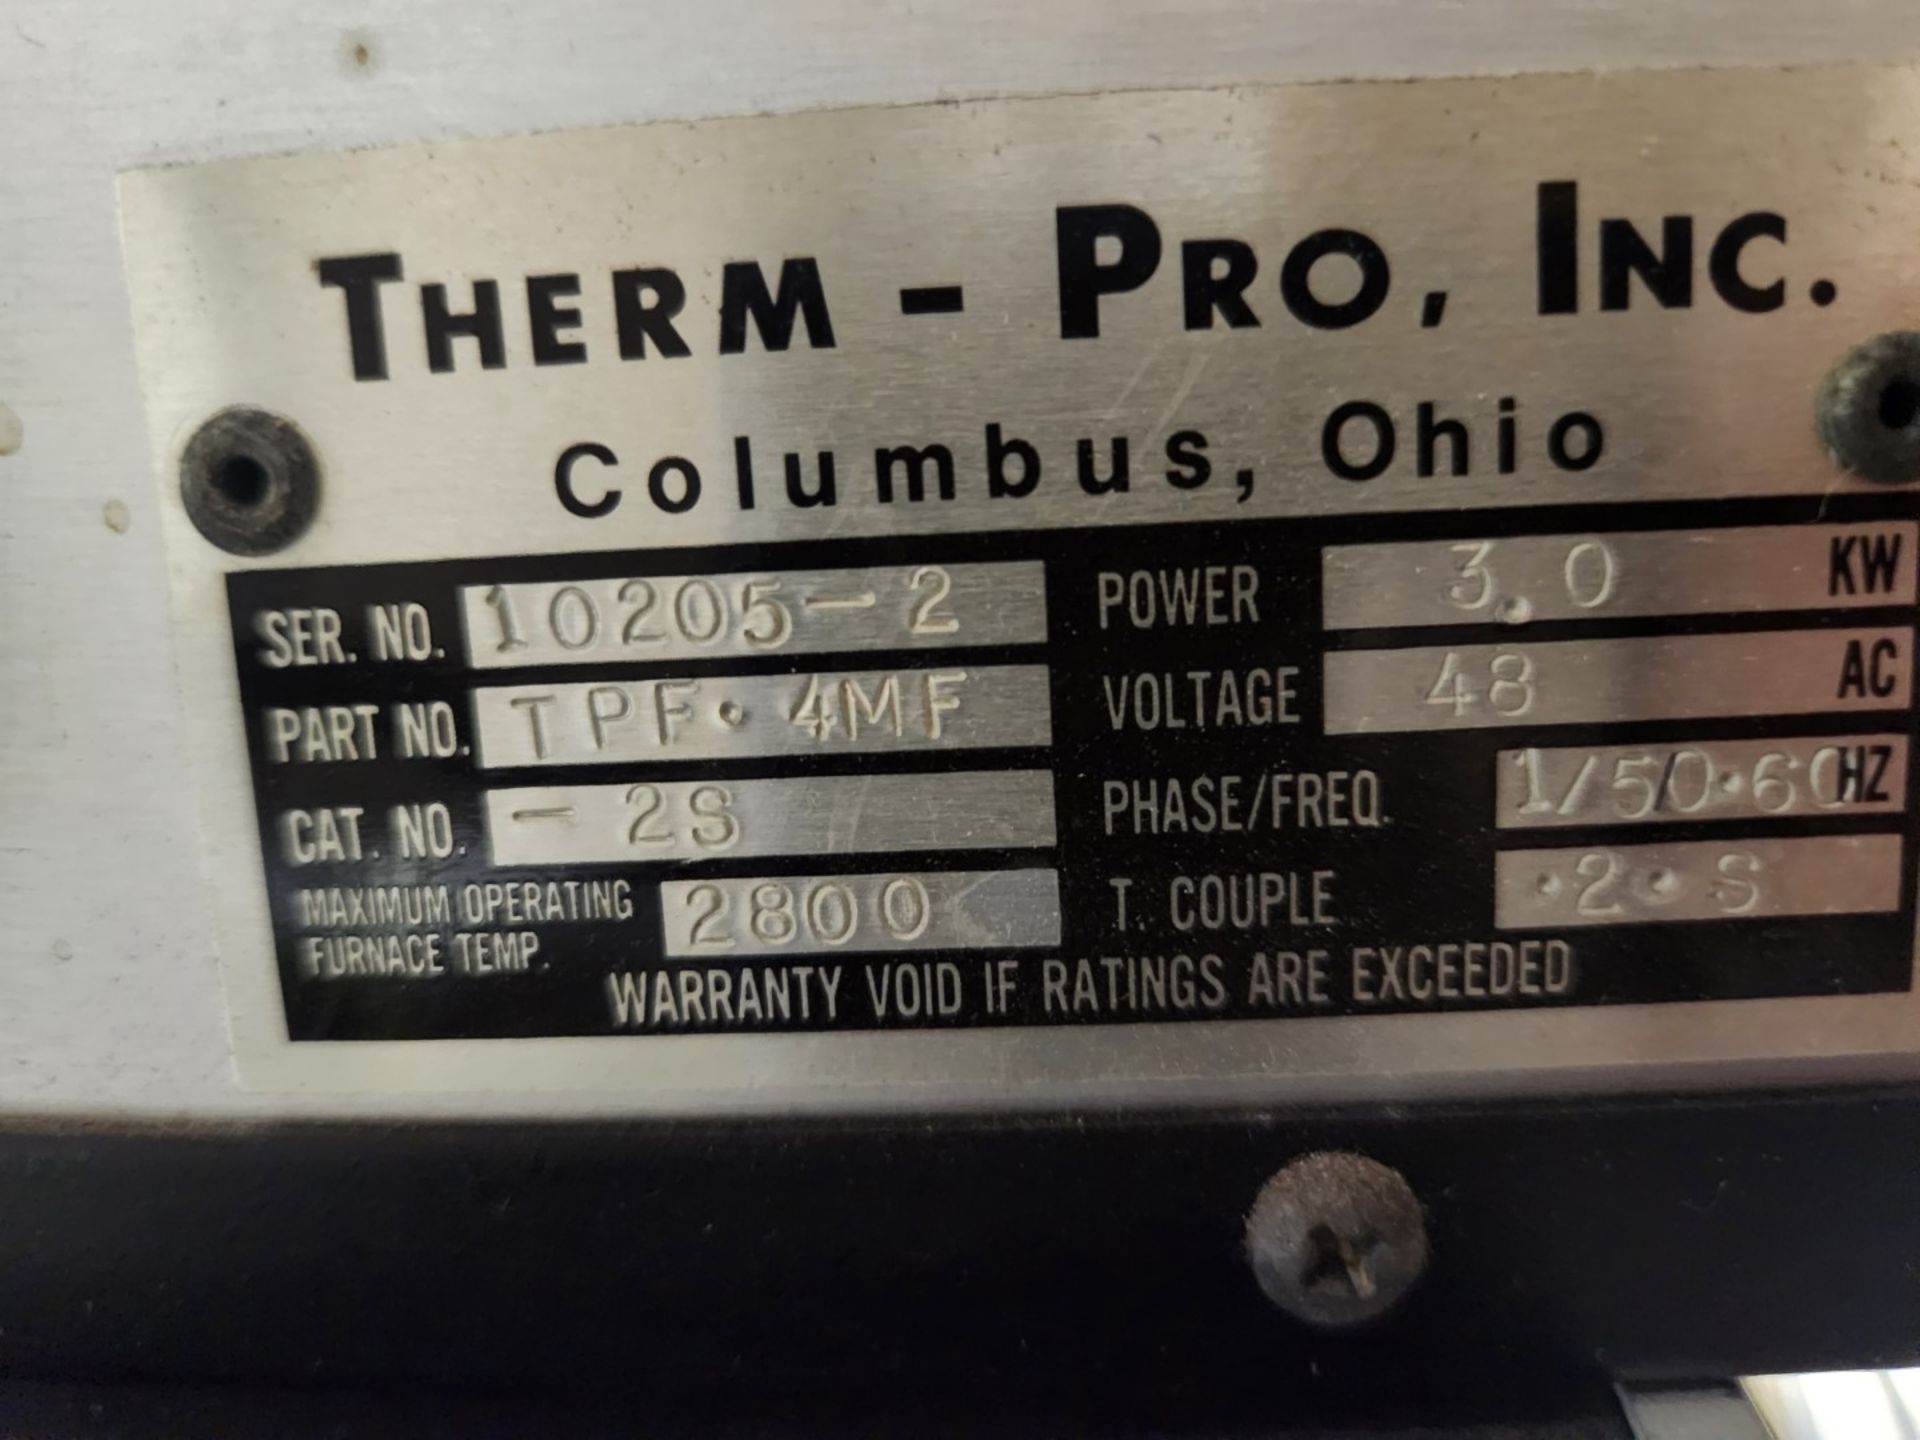 Therm-Pro Furnance with video observation, including camera (model TFM, 120 volts), furnace (model - Image 8 of 10